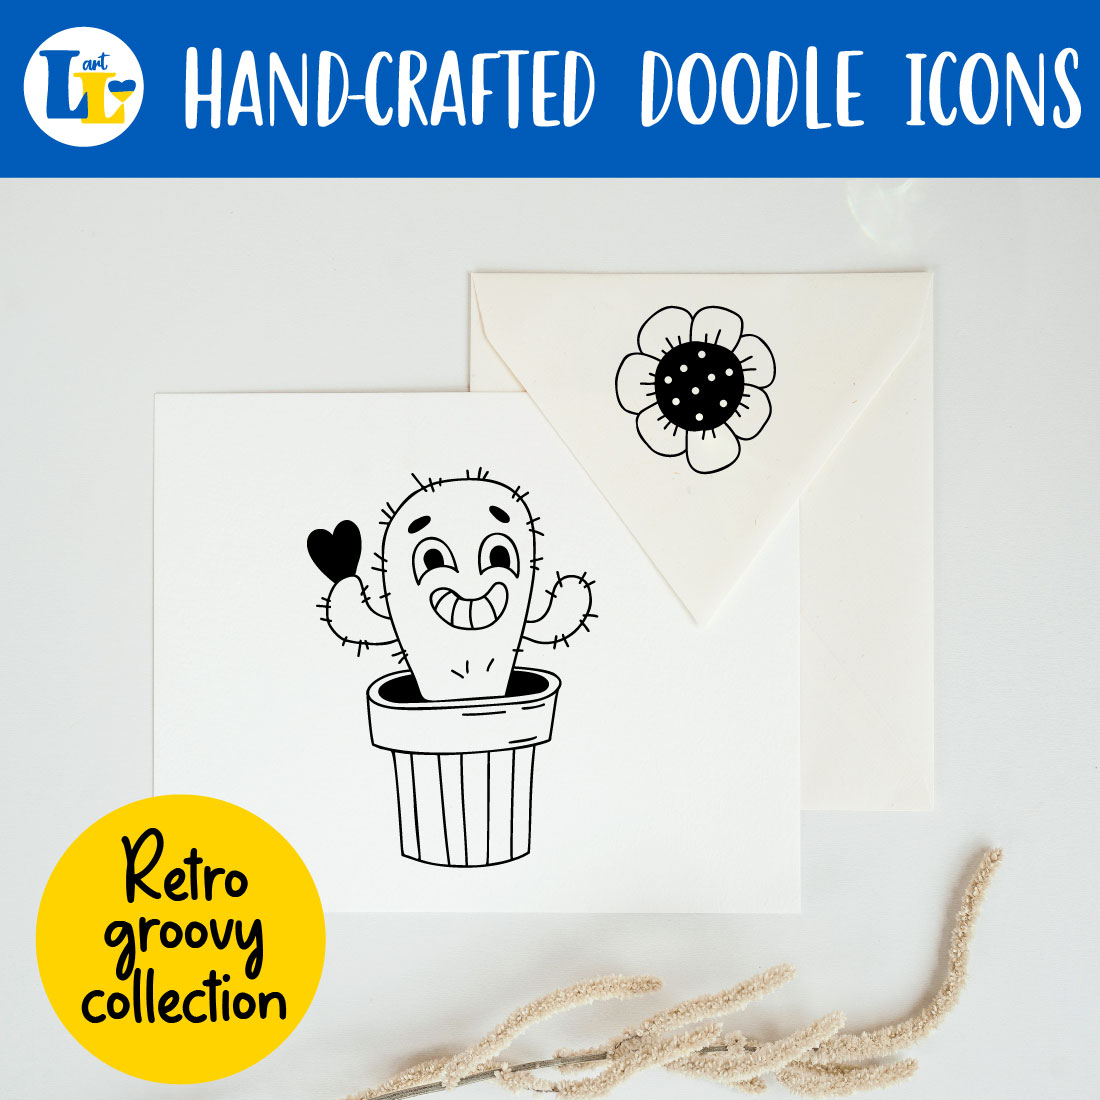 Retro Clipart, Groovy Elements. Hand Hand Drawn Doodle Icons.